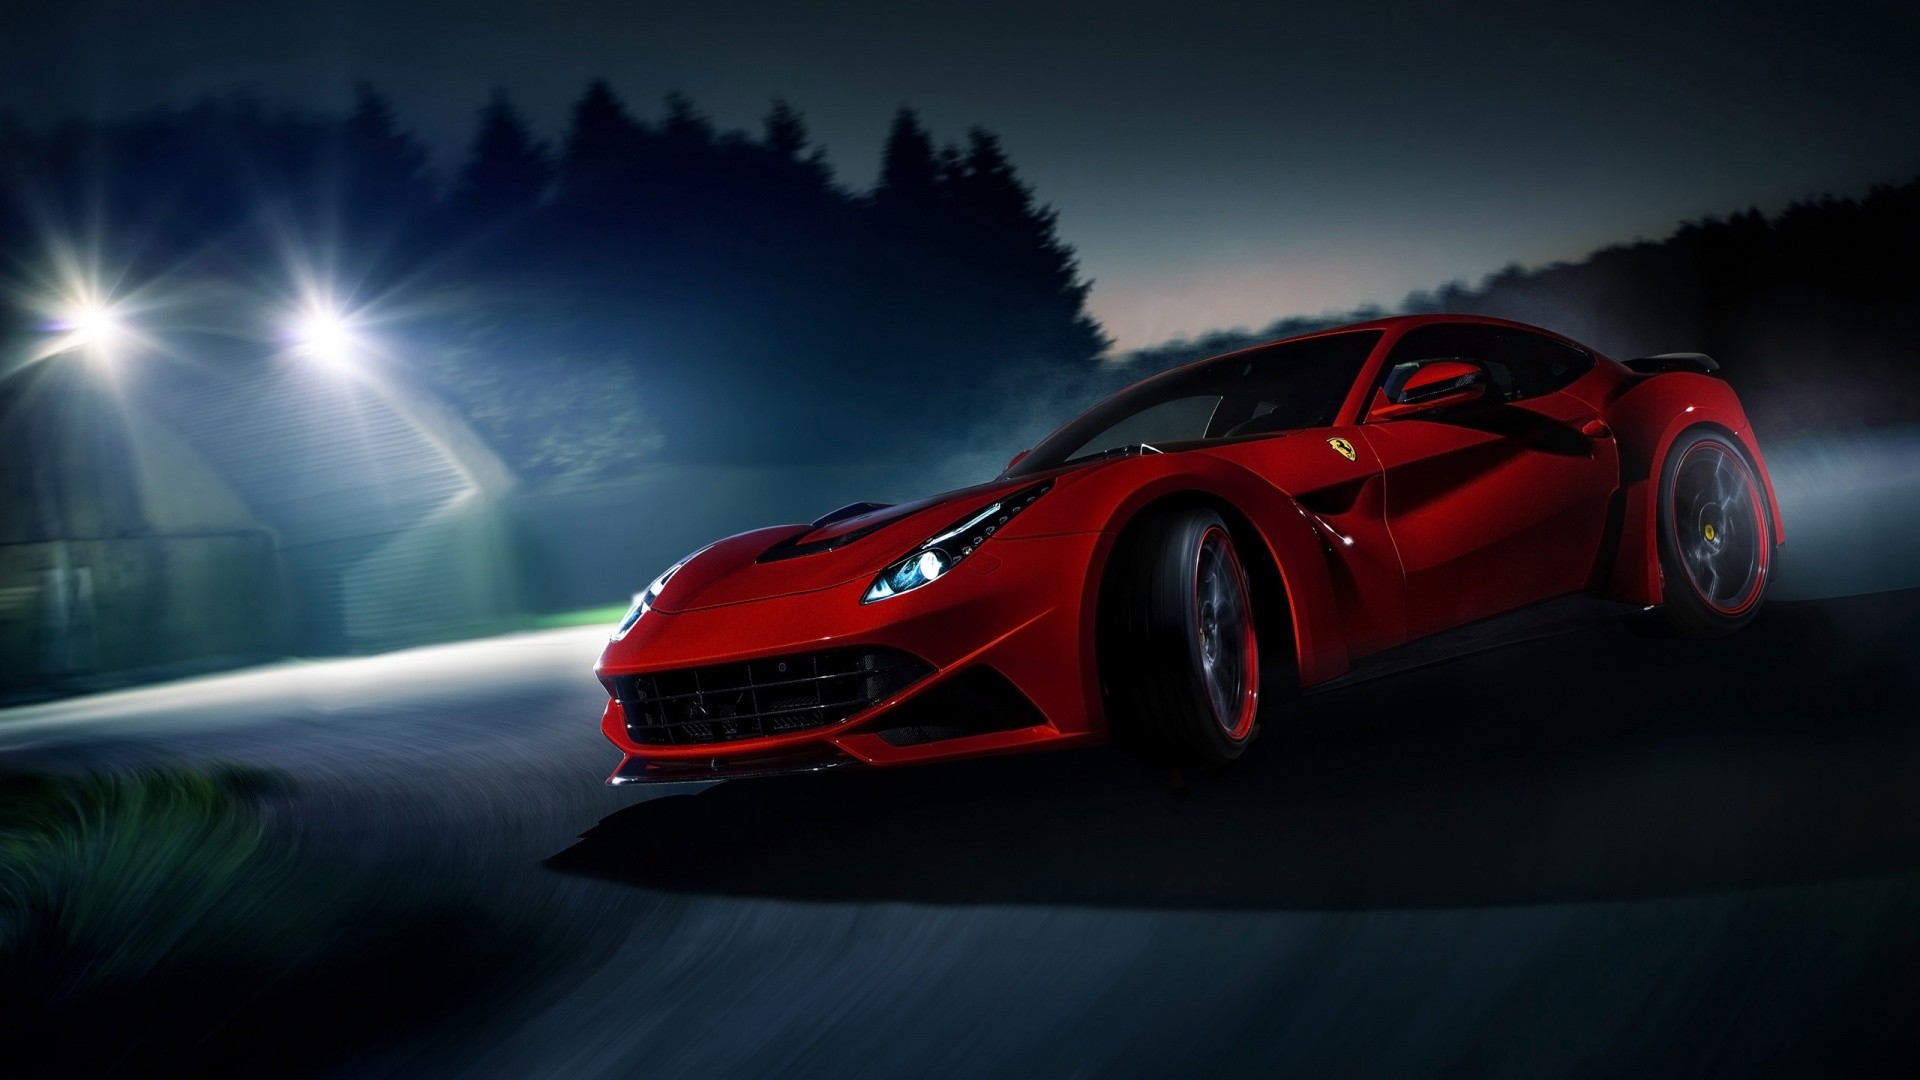 1920x1080 Car HD Wallpapers Awesome.